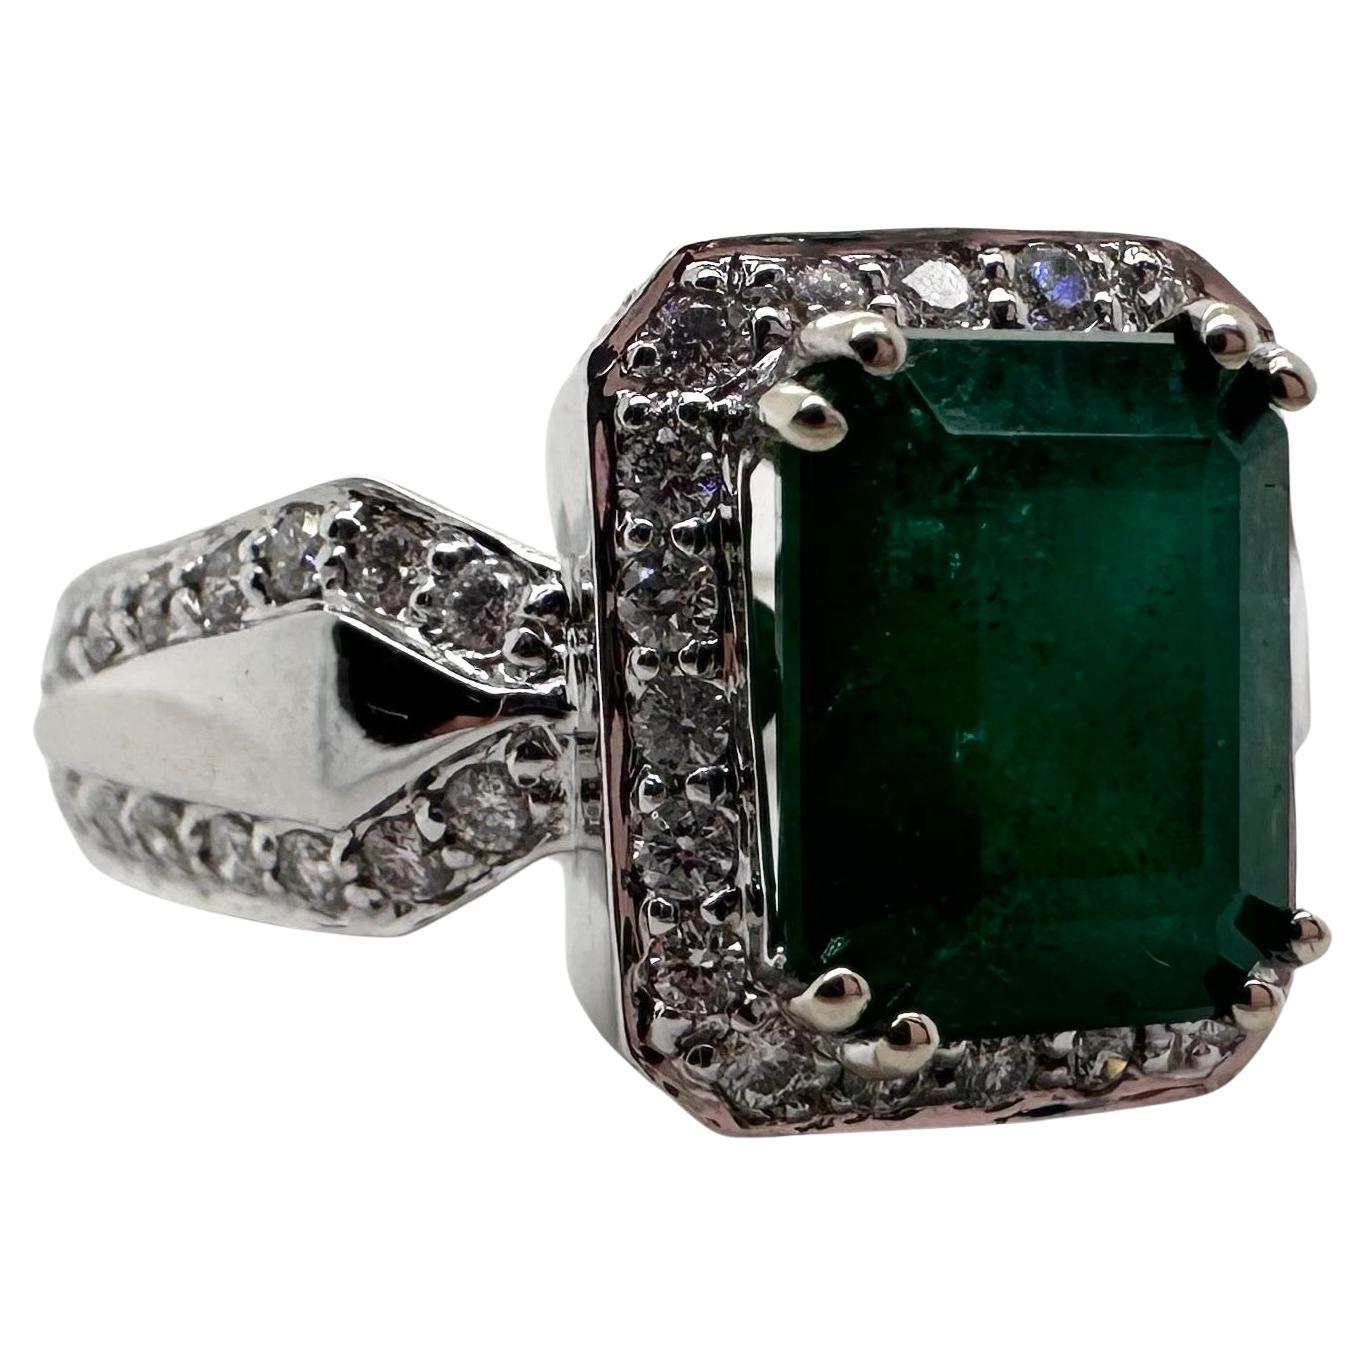 AIG certified 2.94ct Emerald Zambian diamond ring 14KT gold rare find! For Sale